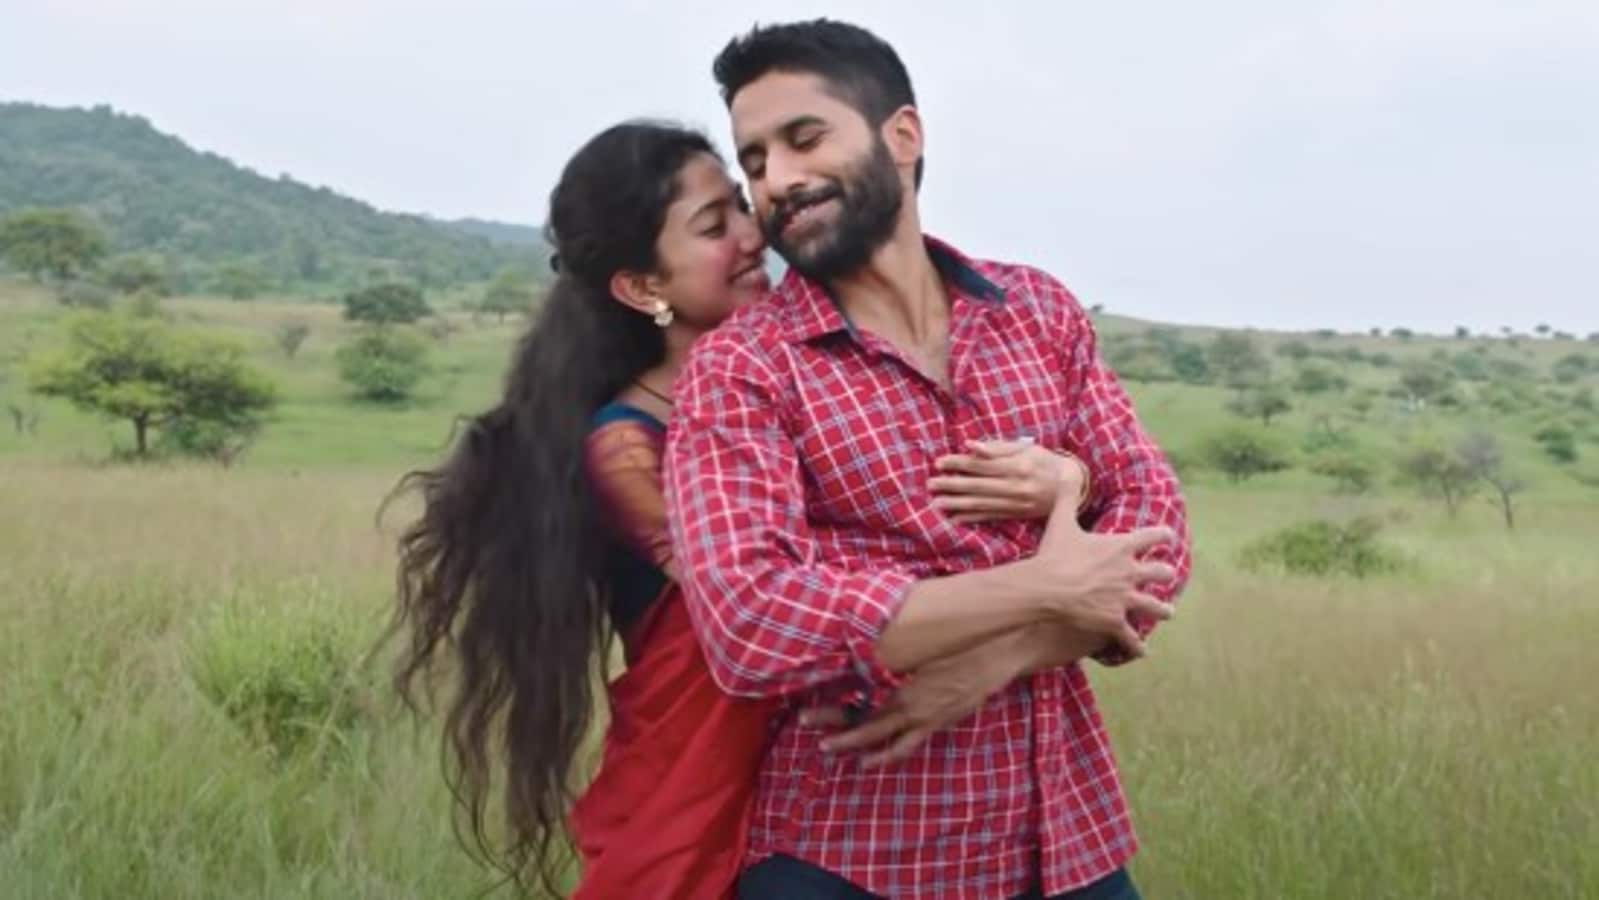 Love Story movie review: Naga Chaitanya's film on forbidden romance is moving